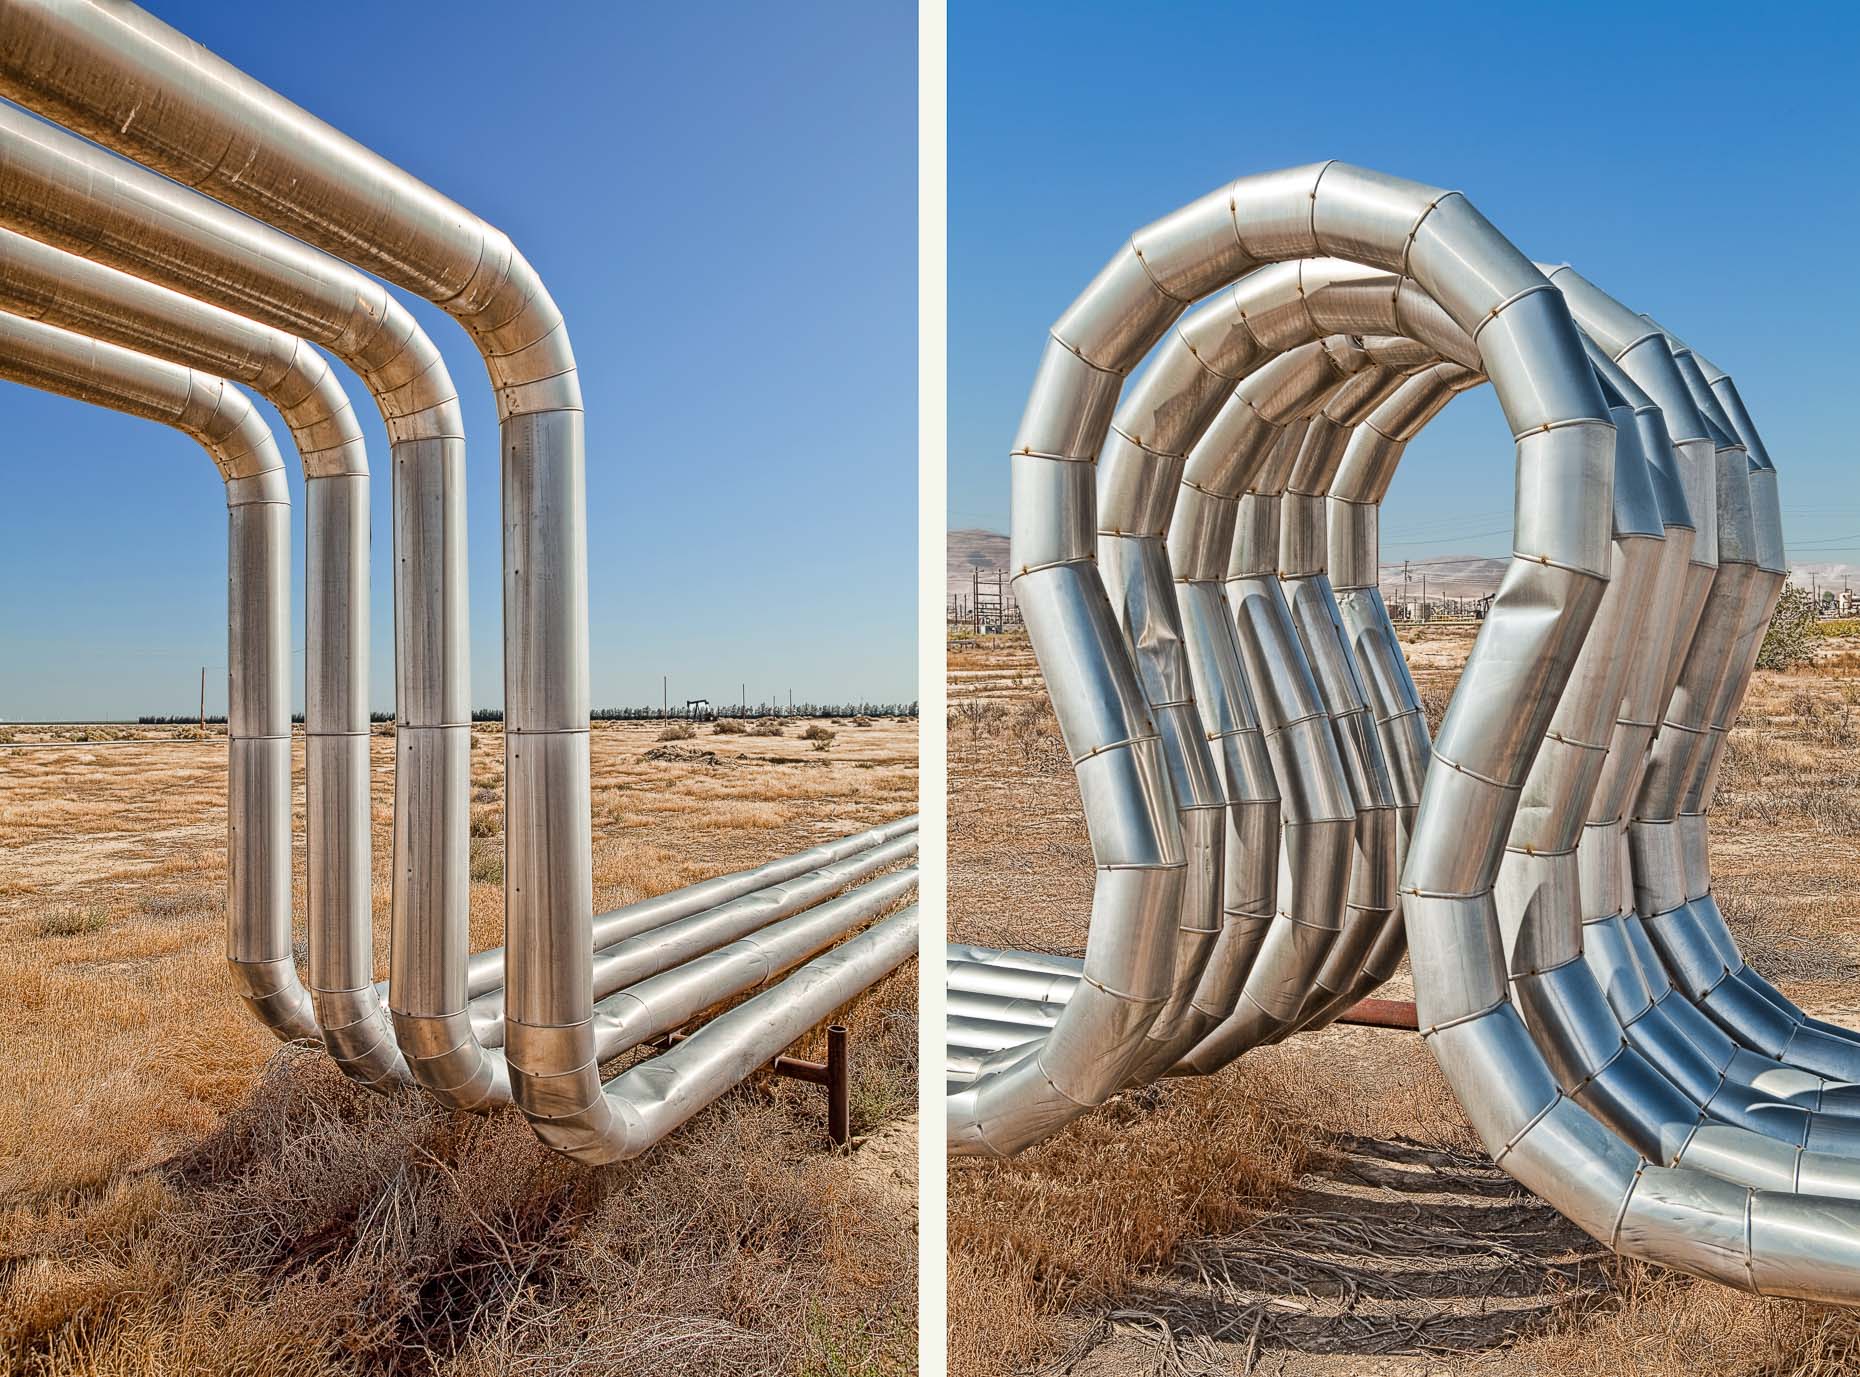 Metal pipes in interesting shapes in oil field, Kern County, California. Industrial. David Zaitz Photography.